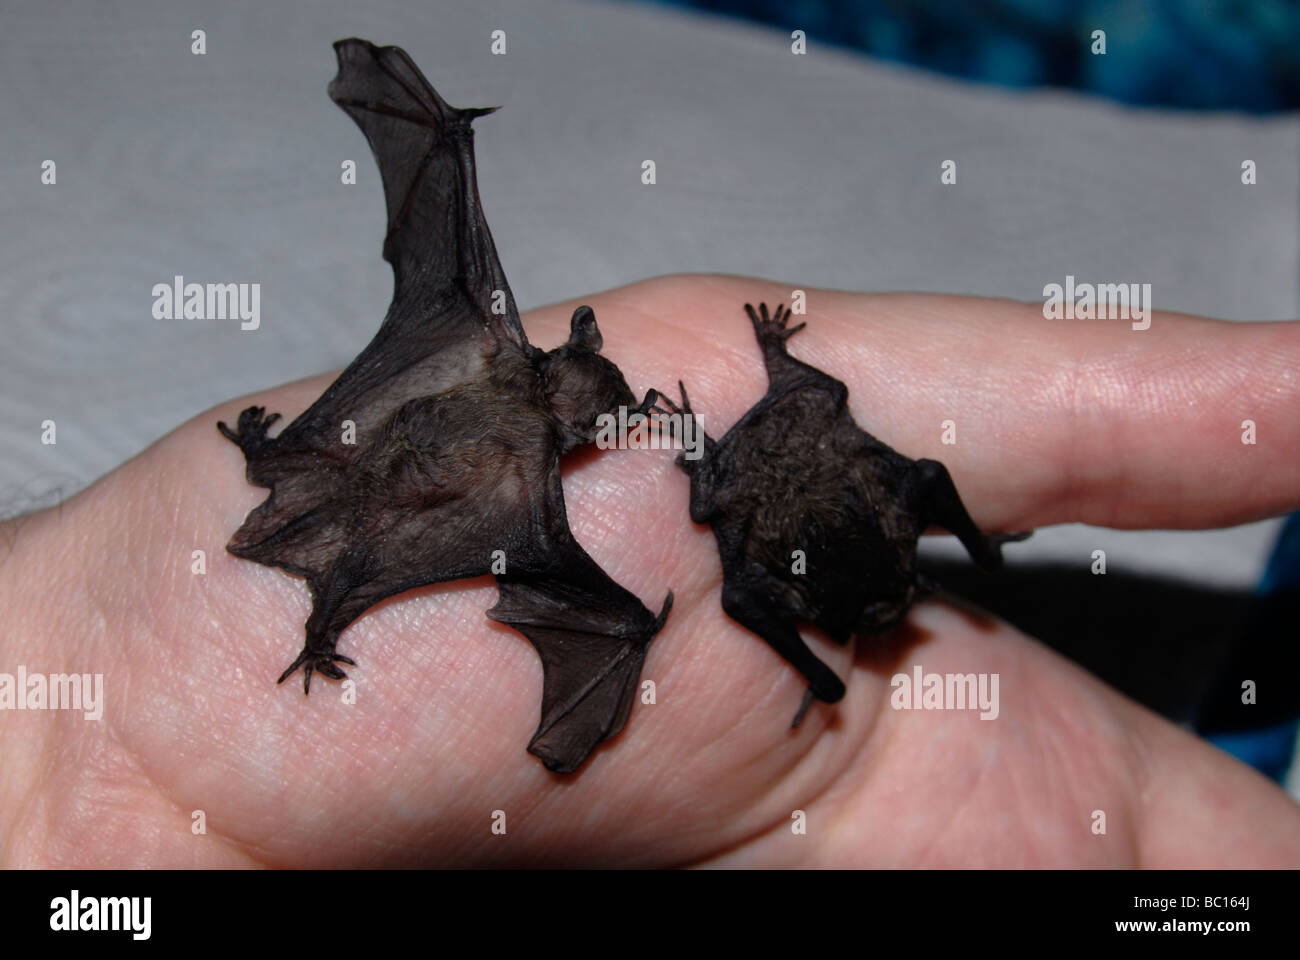 2 bats (common pipistrelle), about 2 weeks old, sitting on a hand, one testing its wings Stock Photo